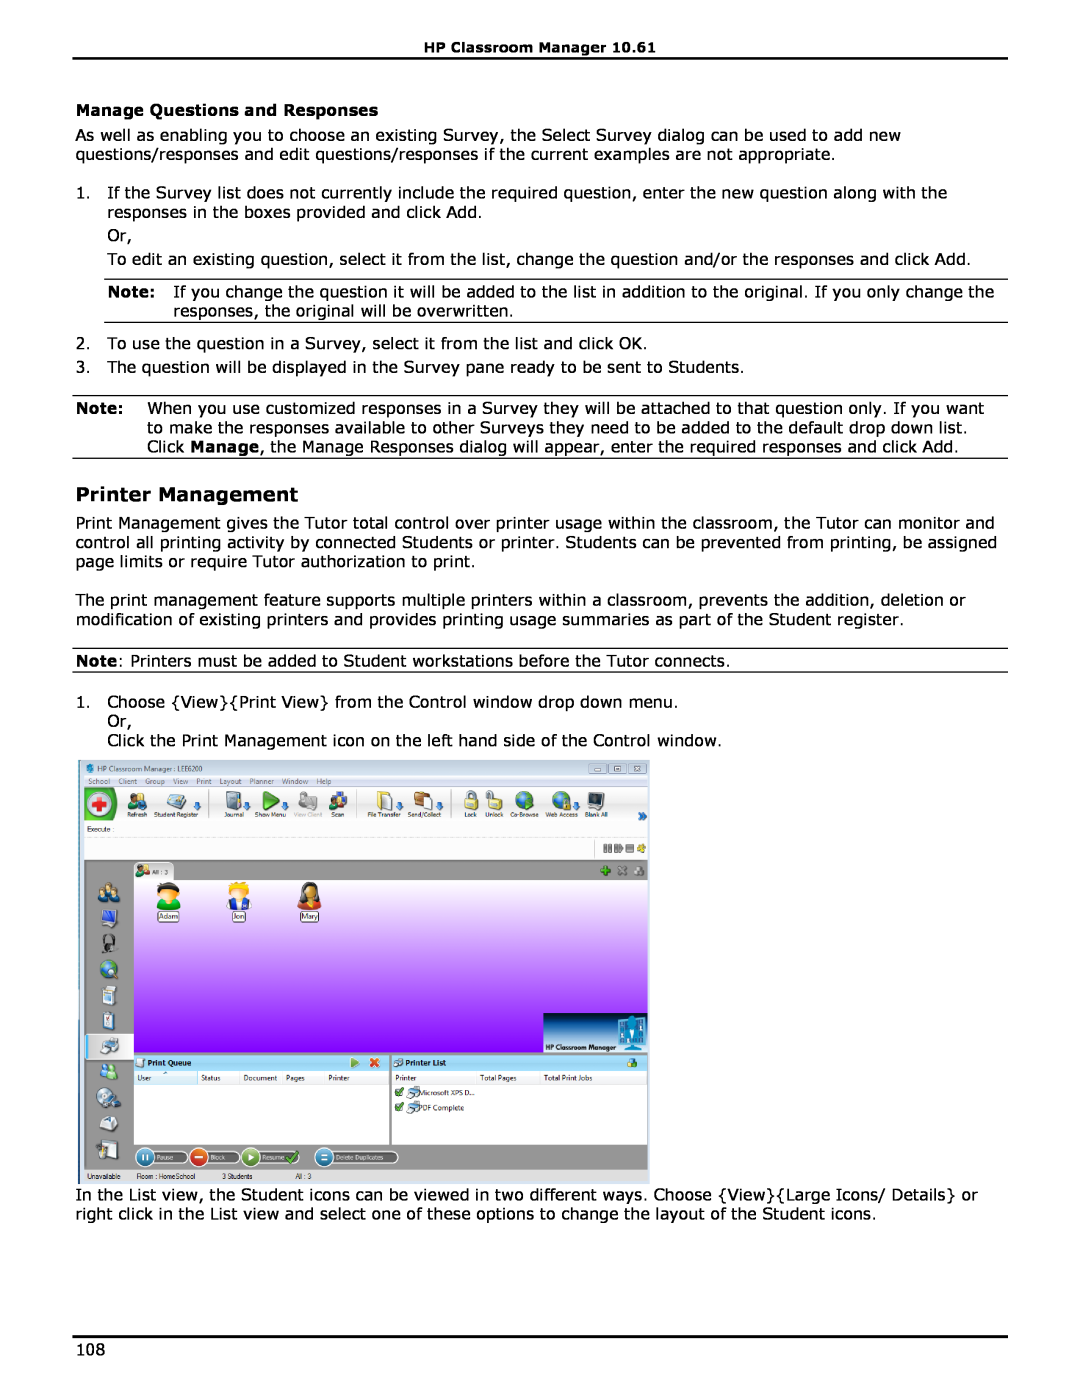 HP Classroom Manager manual Printer Management, Manage Questions and Responses 